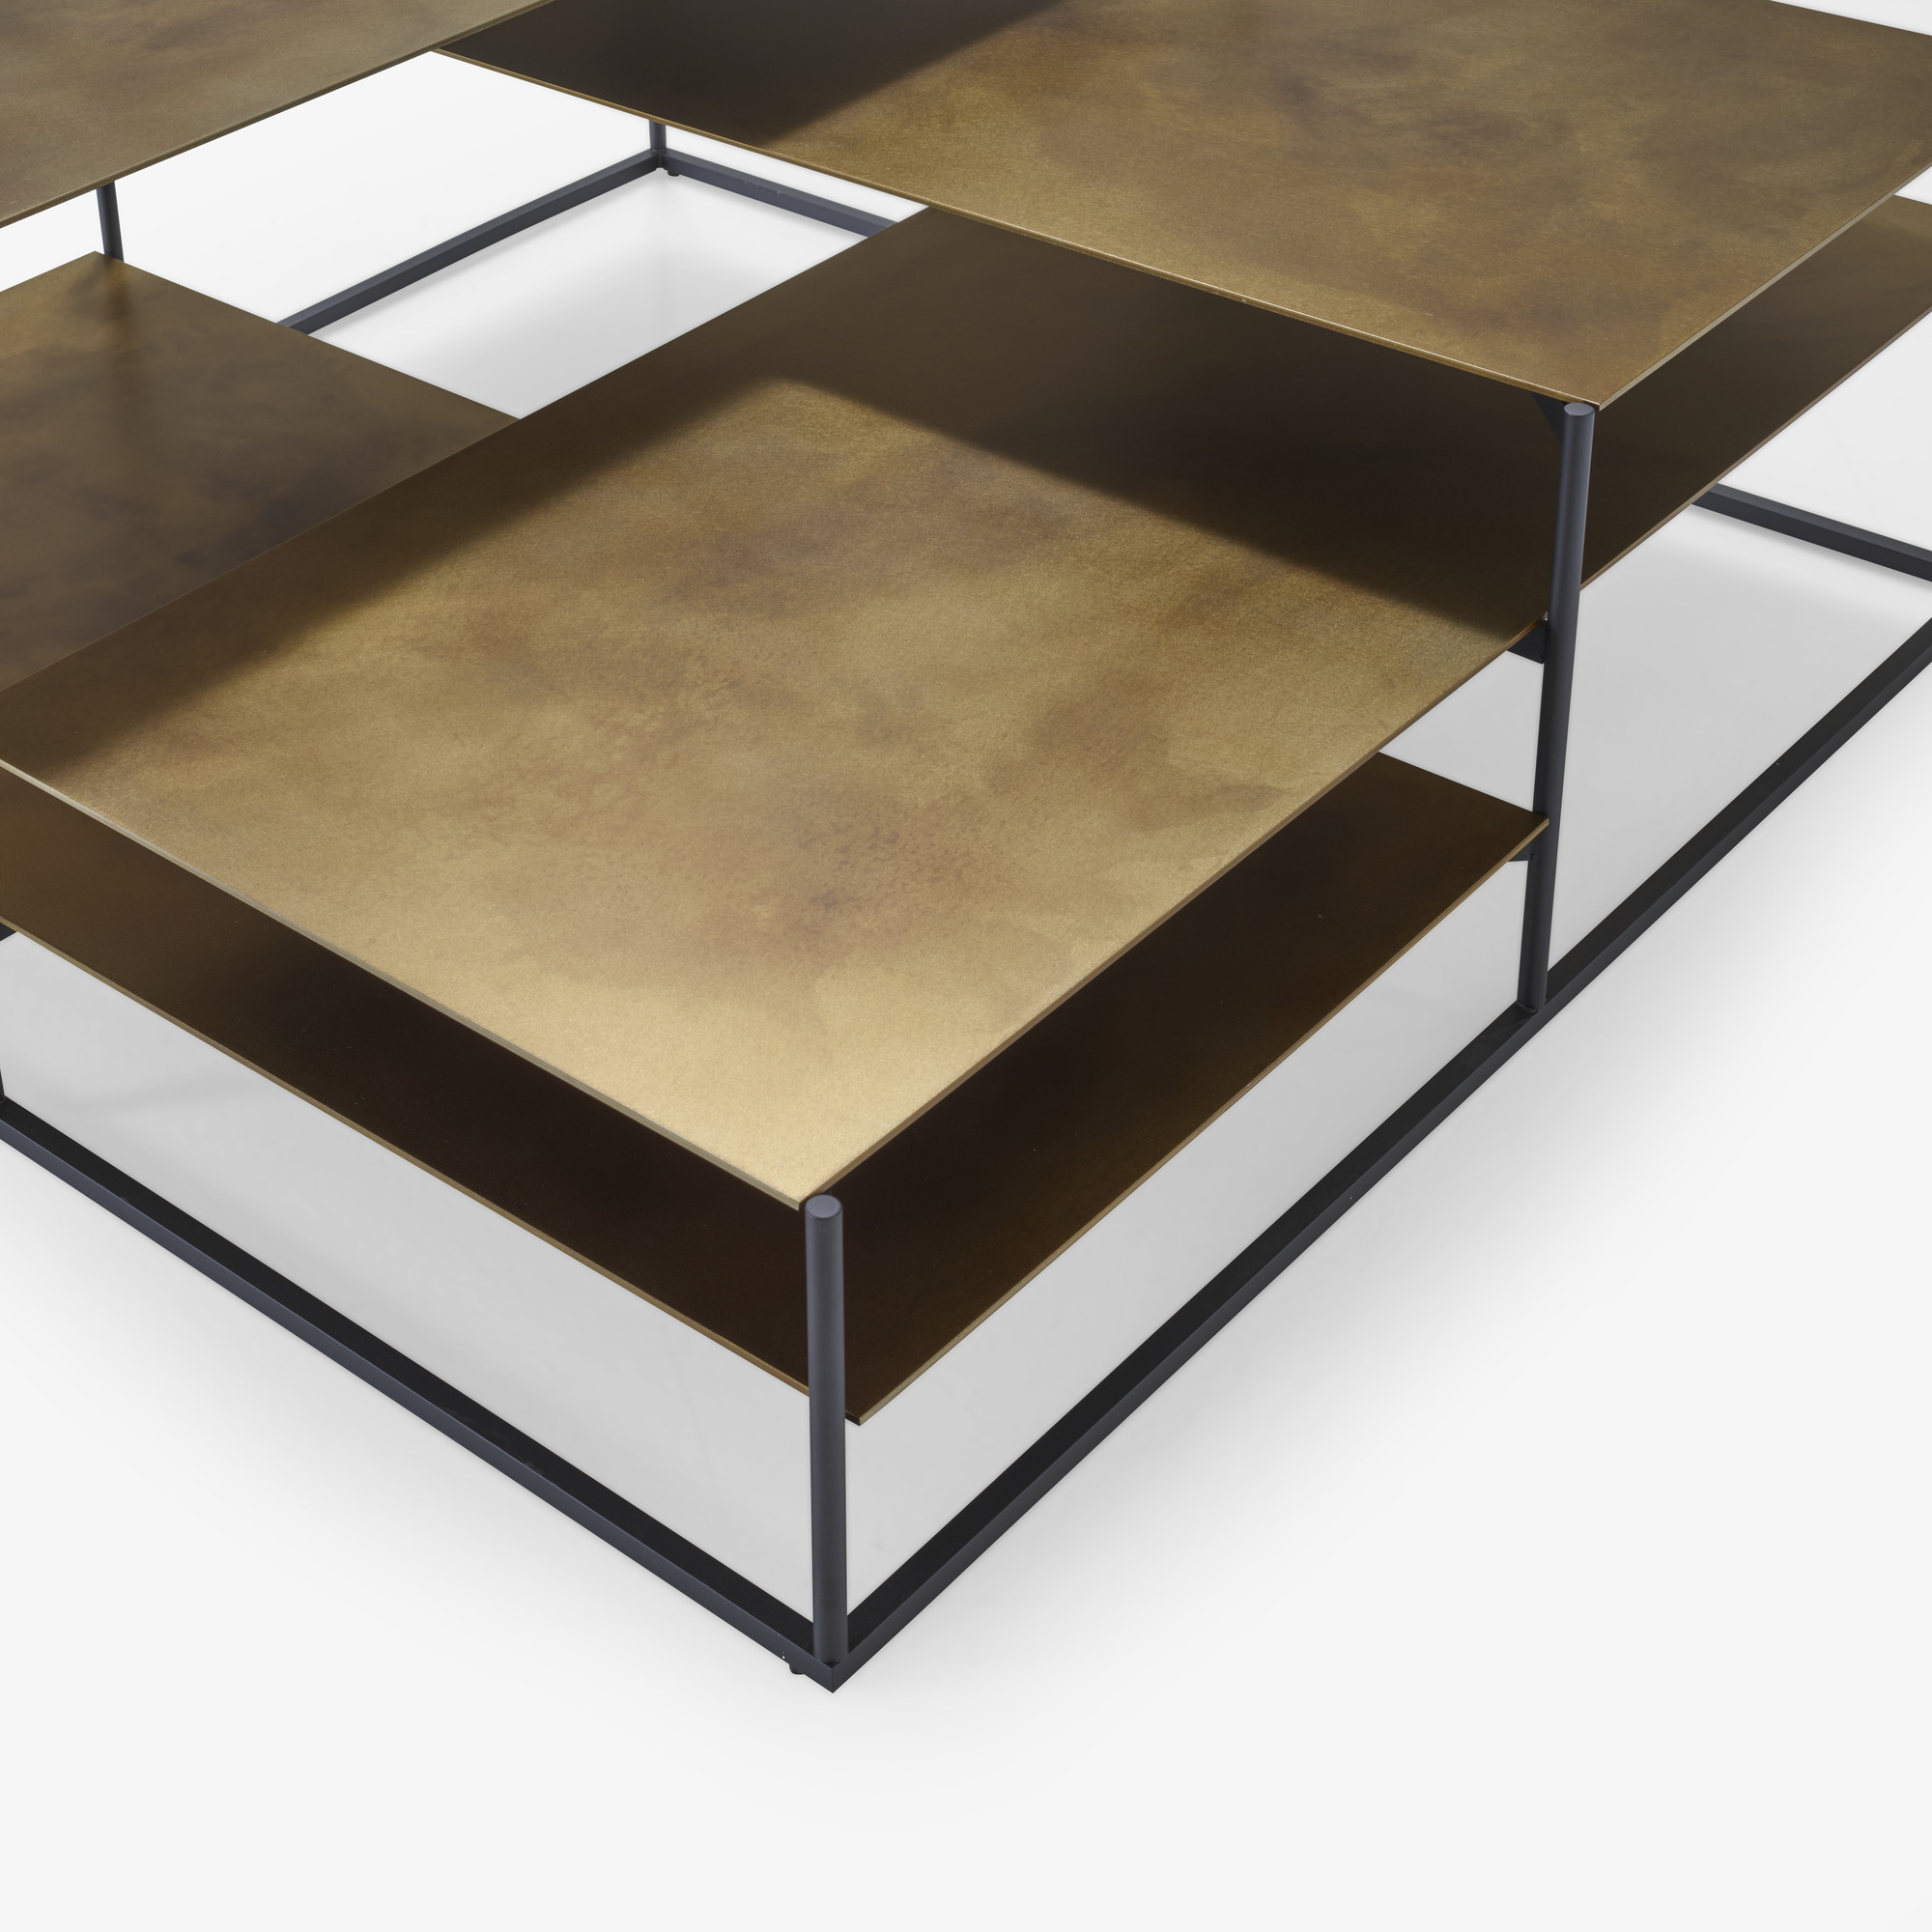 Image Low table small tops in golden brass aspect steel 4